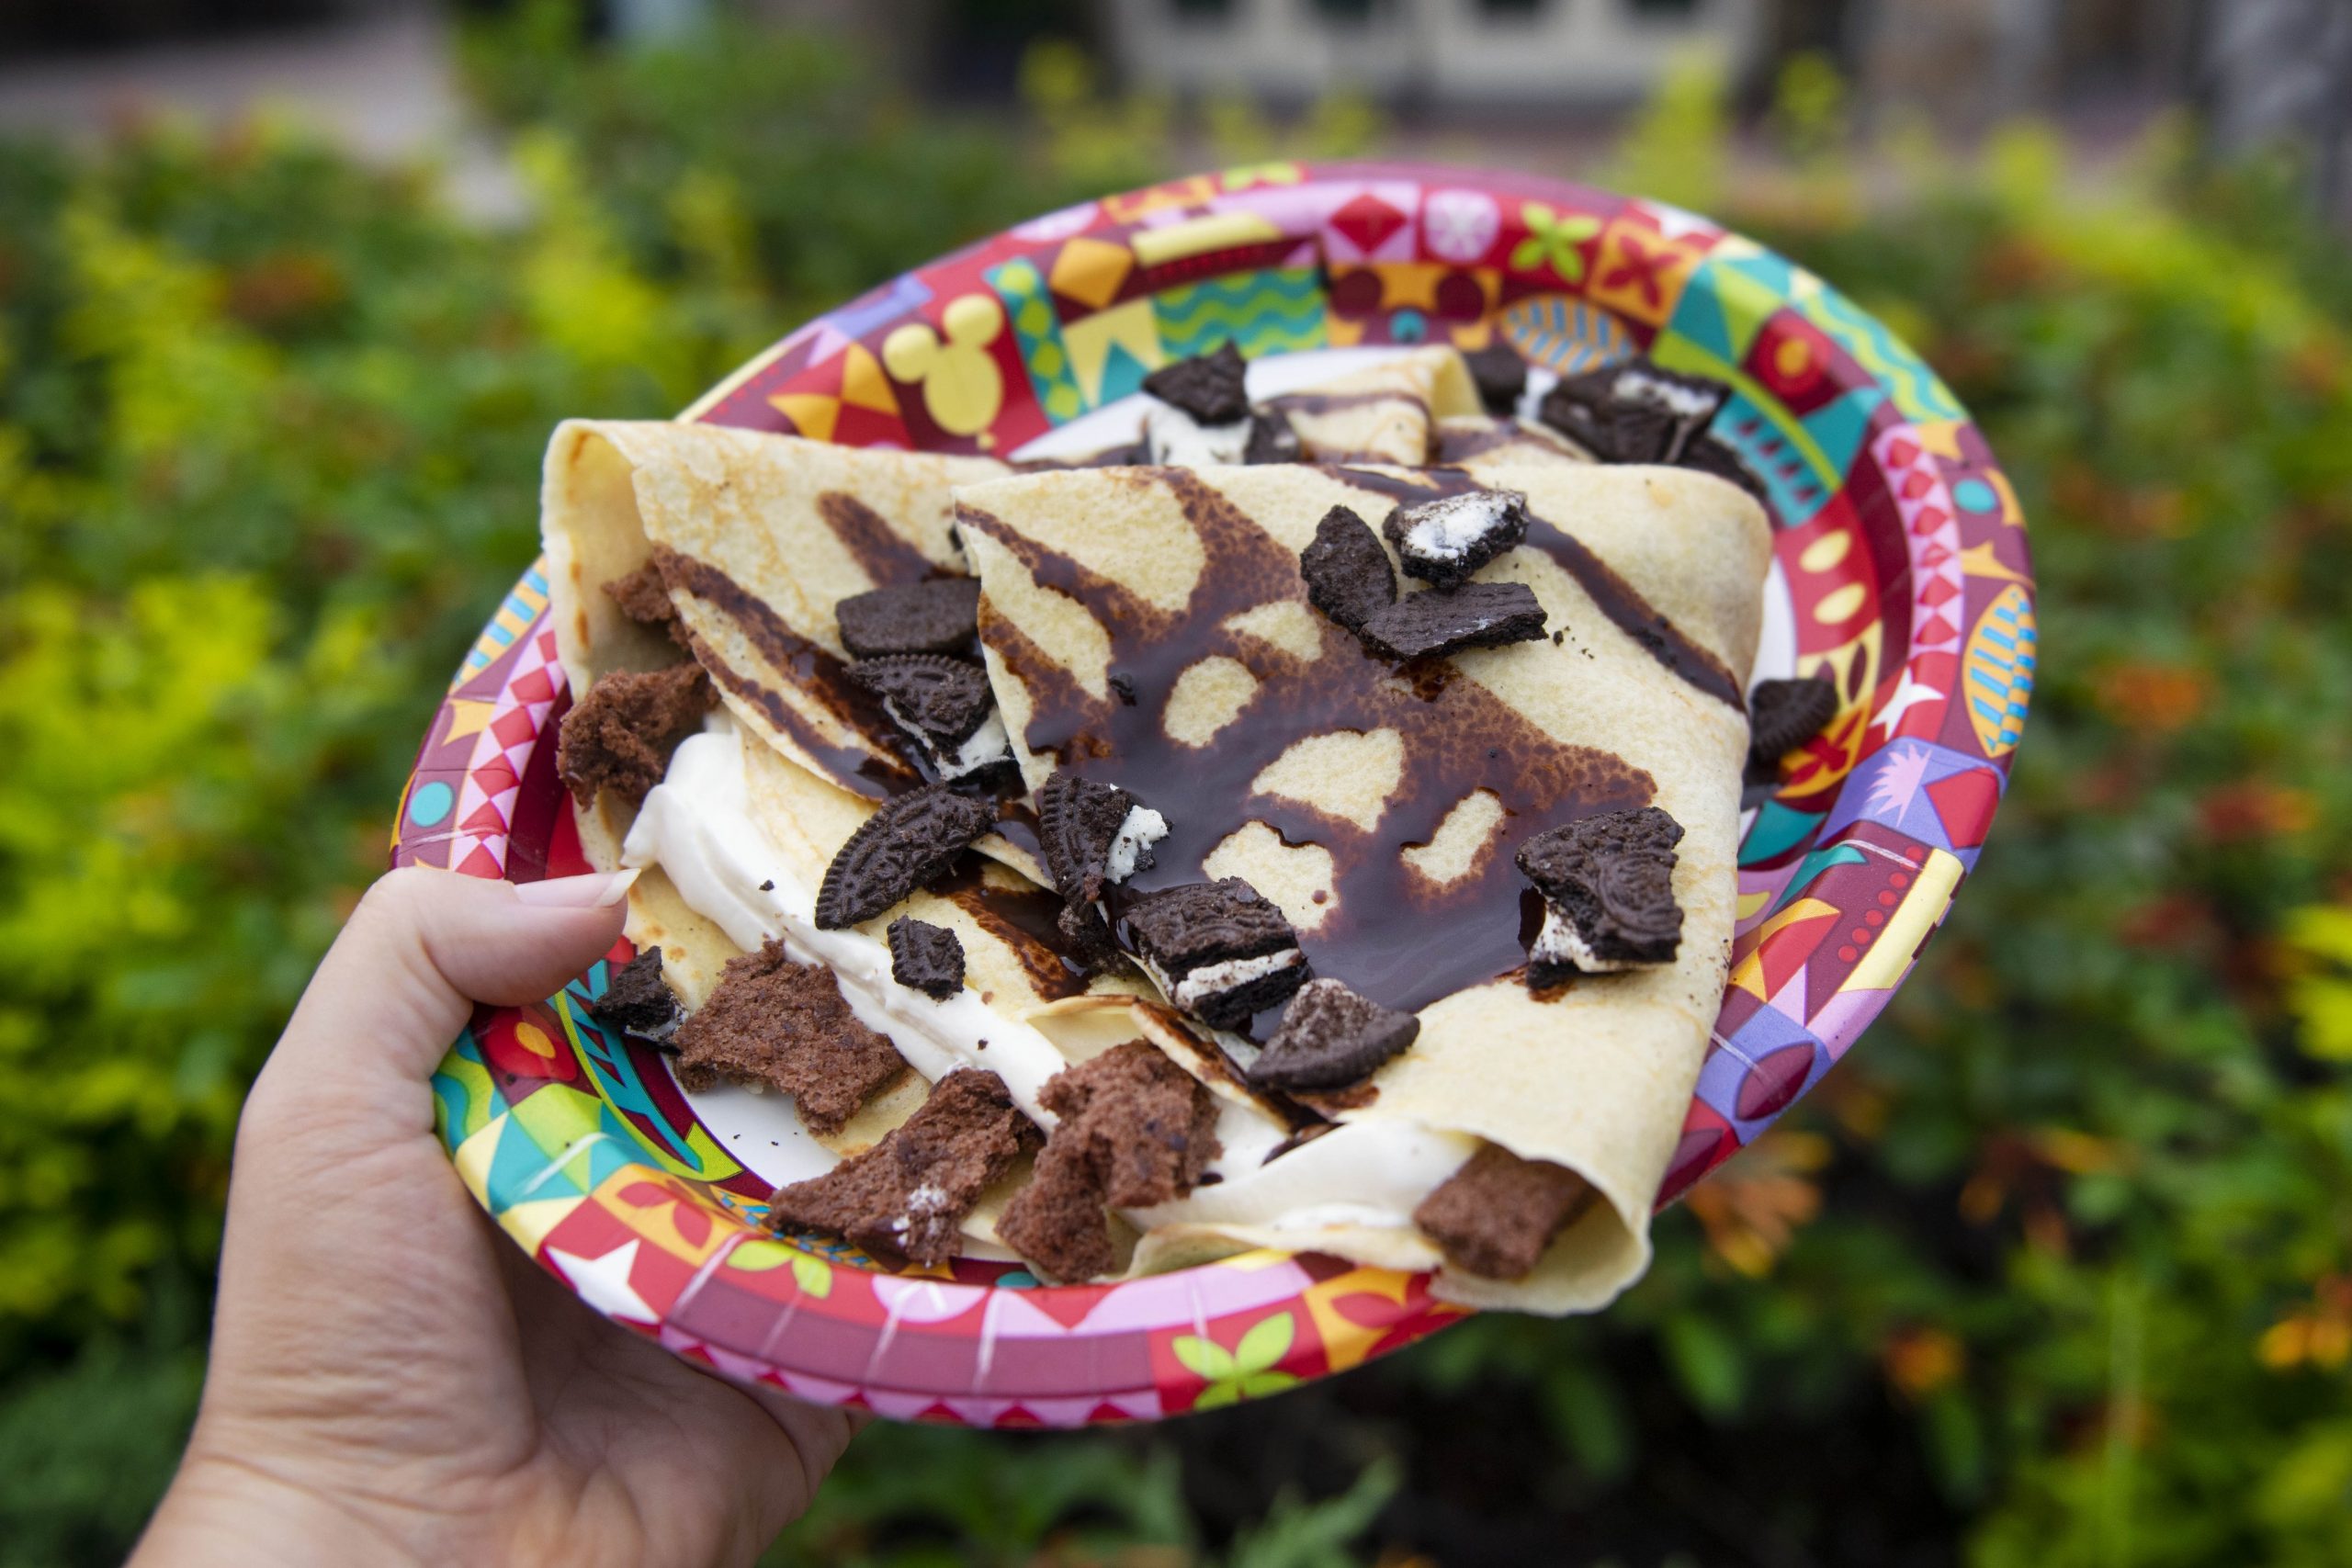 A New Cookies And Cream Crepe Is Coming To Disney World The Disney Food Blog